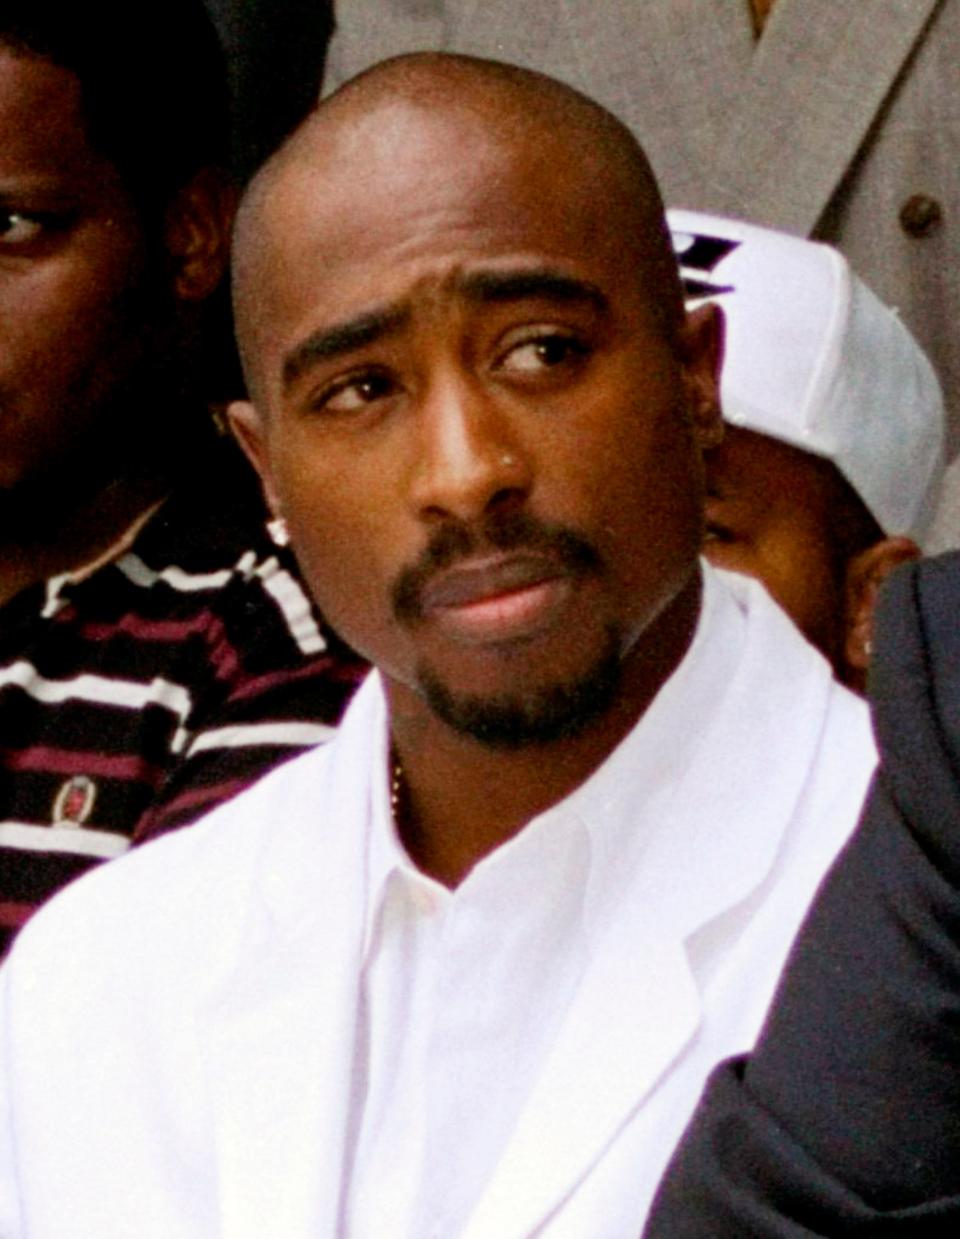 Las Vegas police have arrested a man in the deadly 1996 drive-by shooting of Tupac Shakur, a long-awaited break in the case.